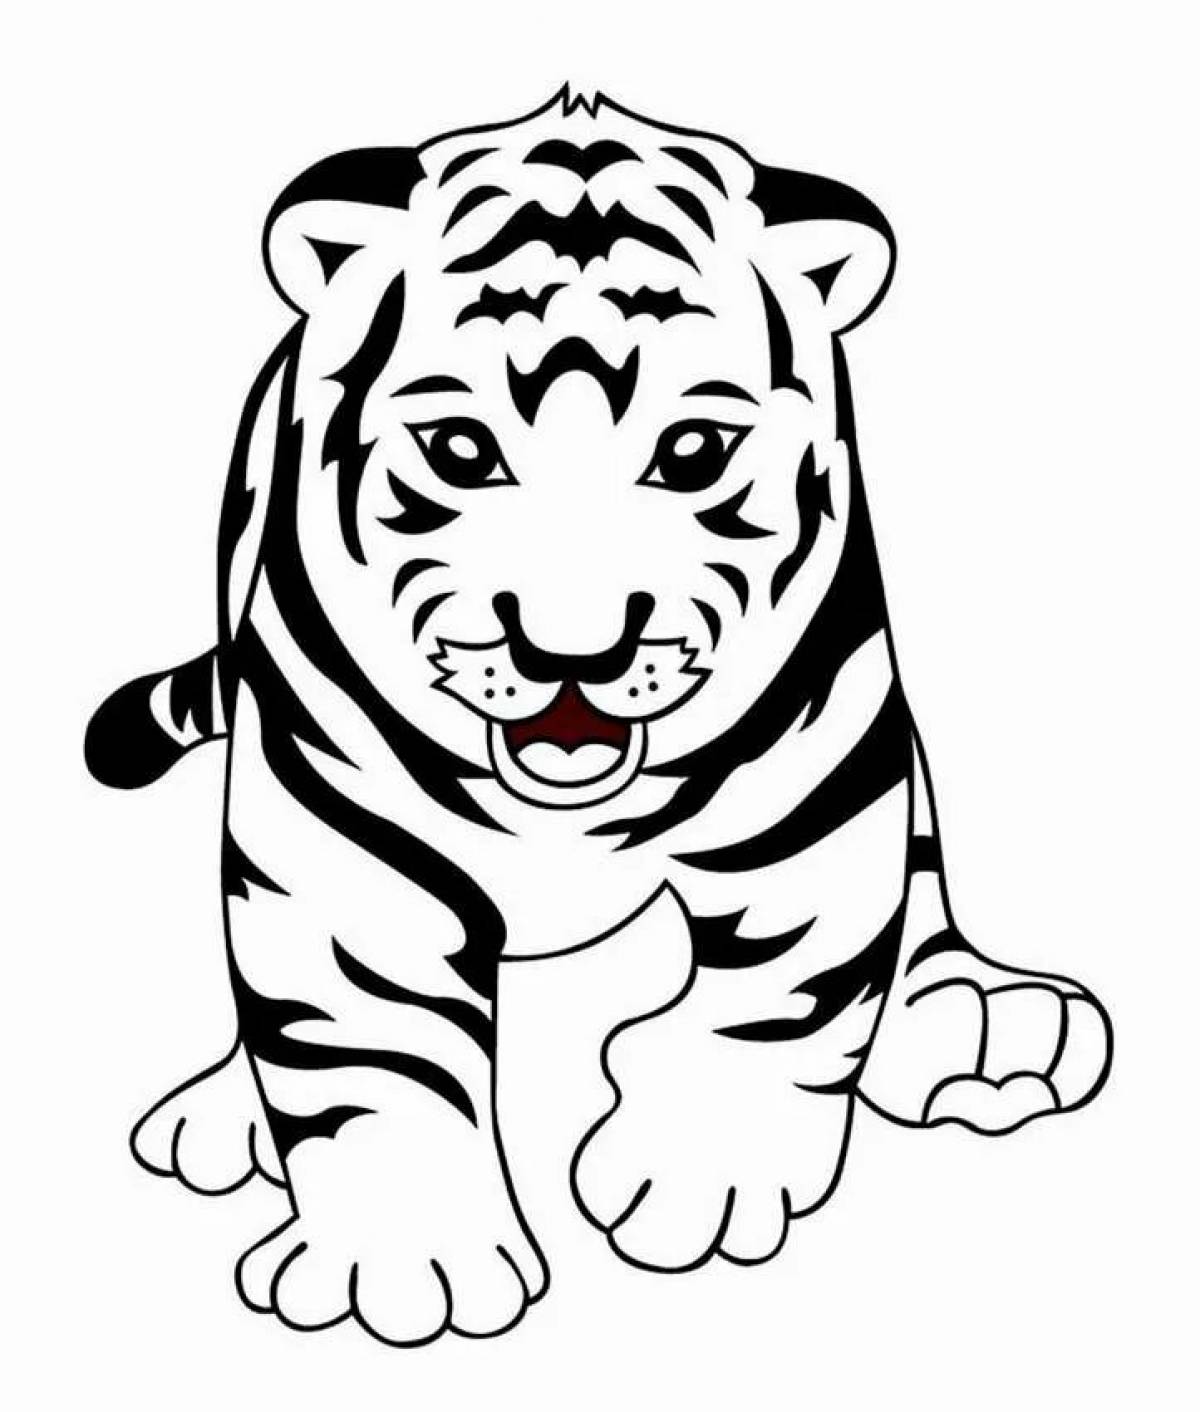 Excellent coloring white tiger